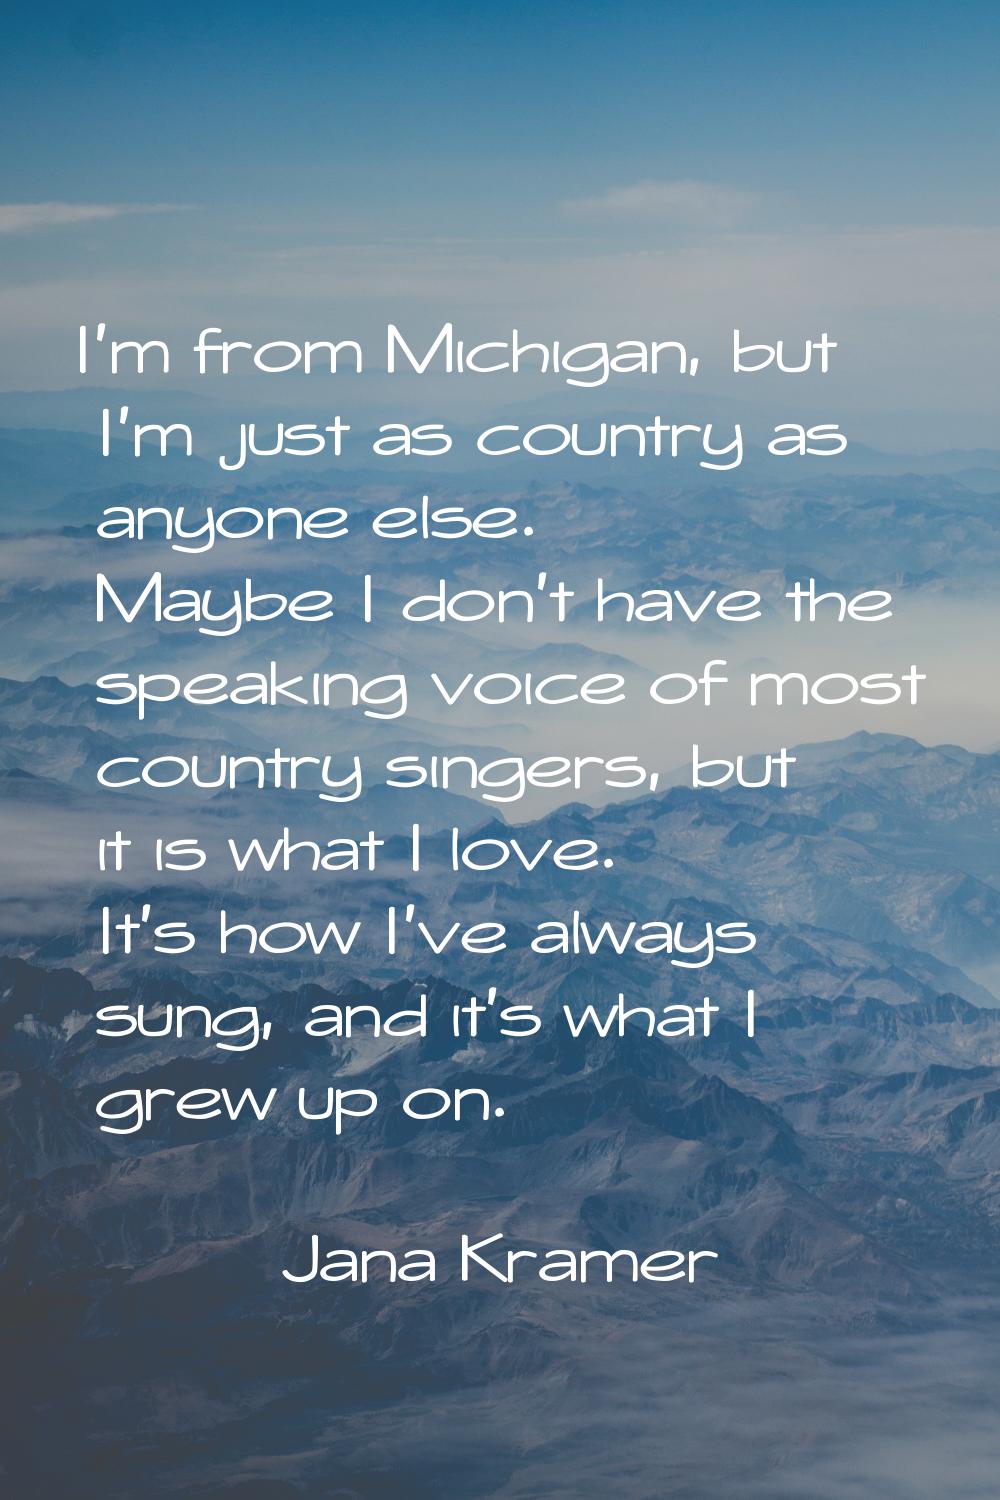 I'm from Michigan, but I'm just as country as anyone else. Maybe I don't have the speaking voice of